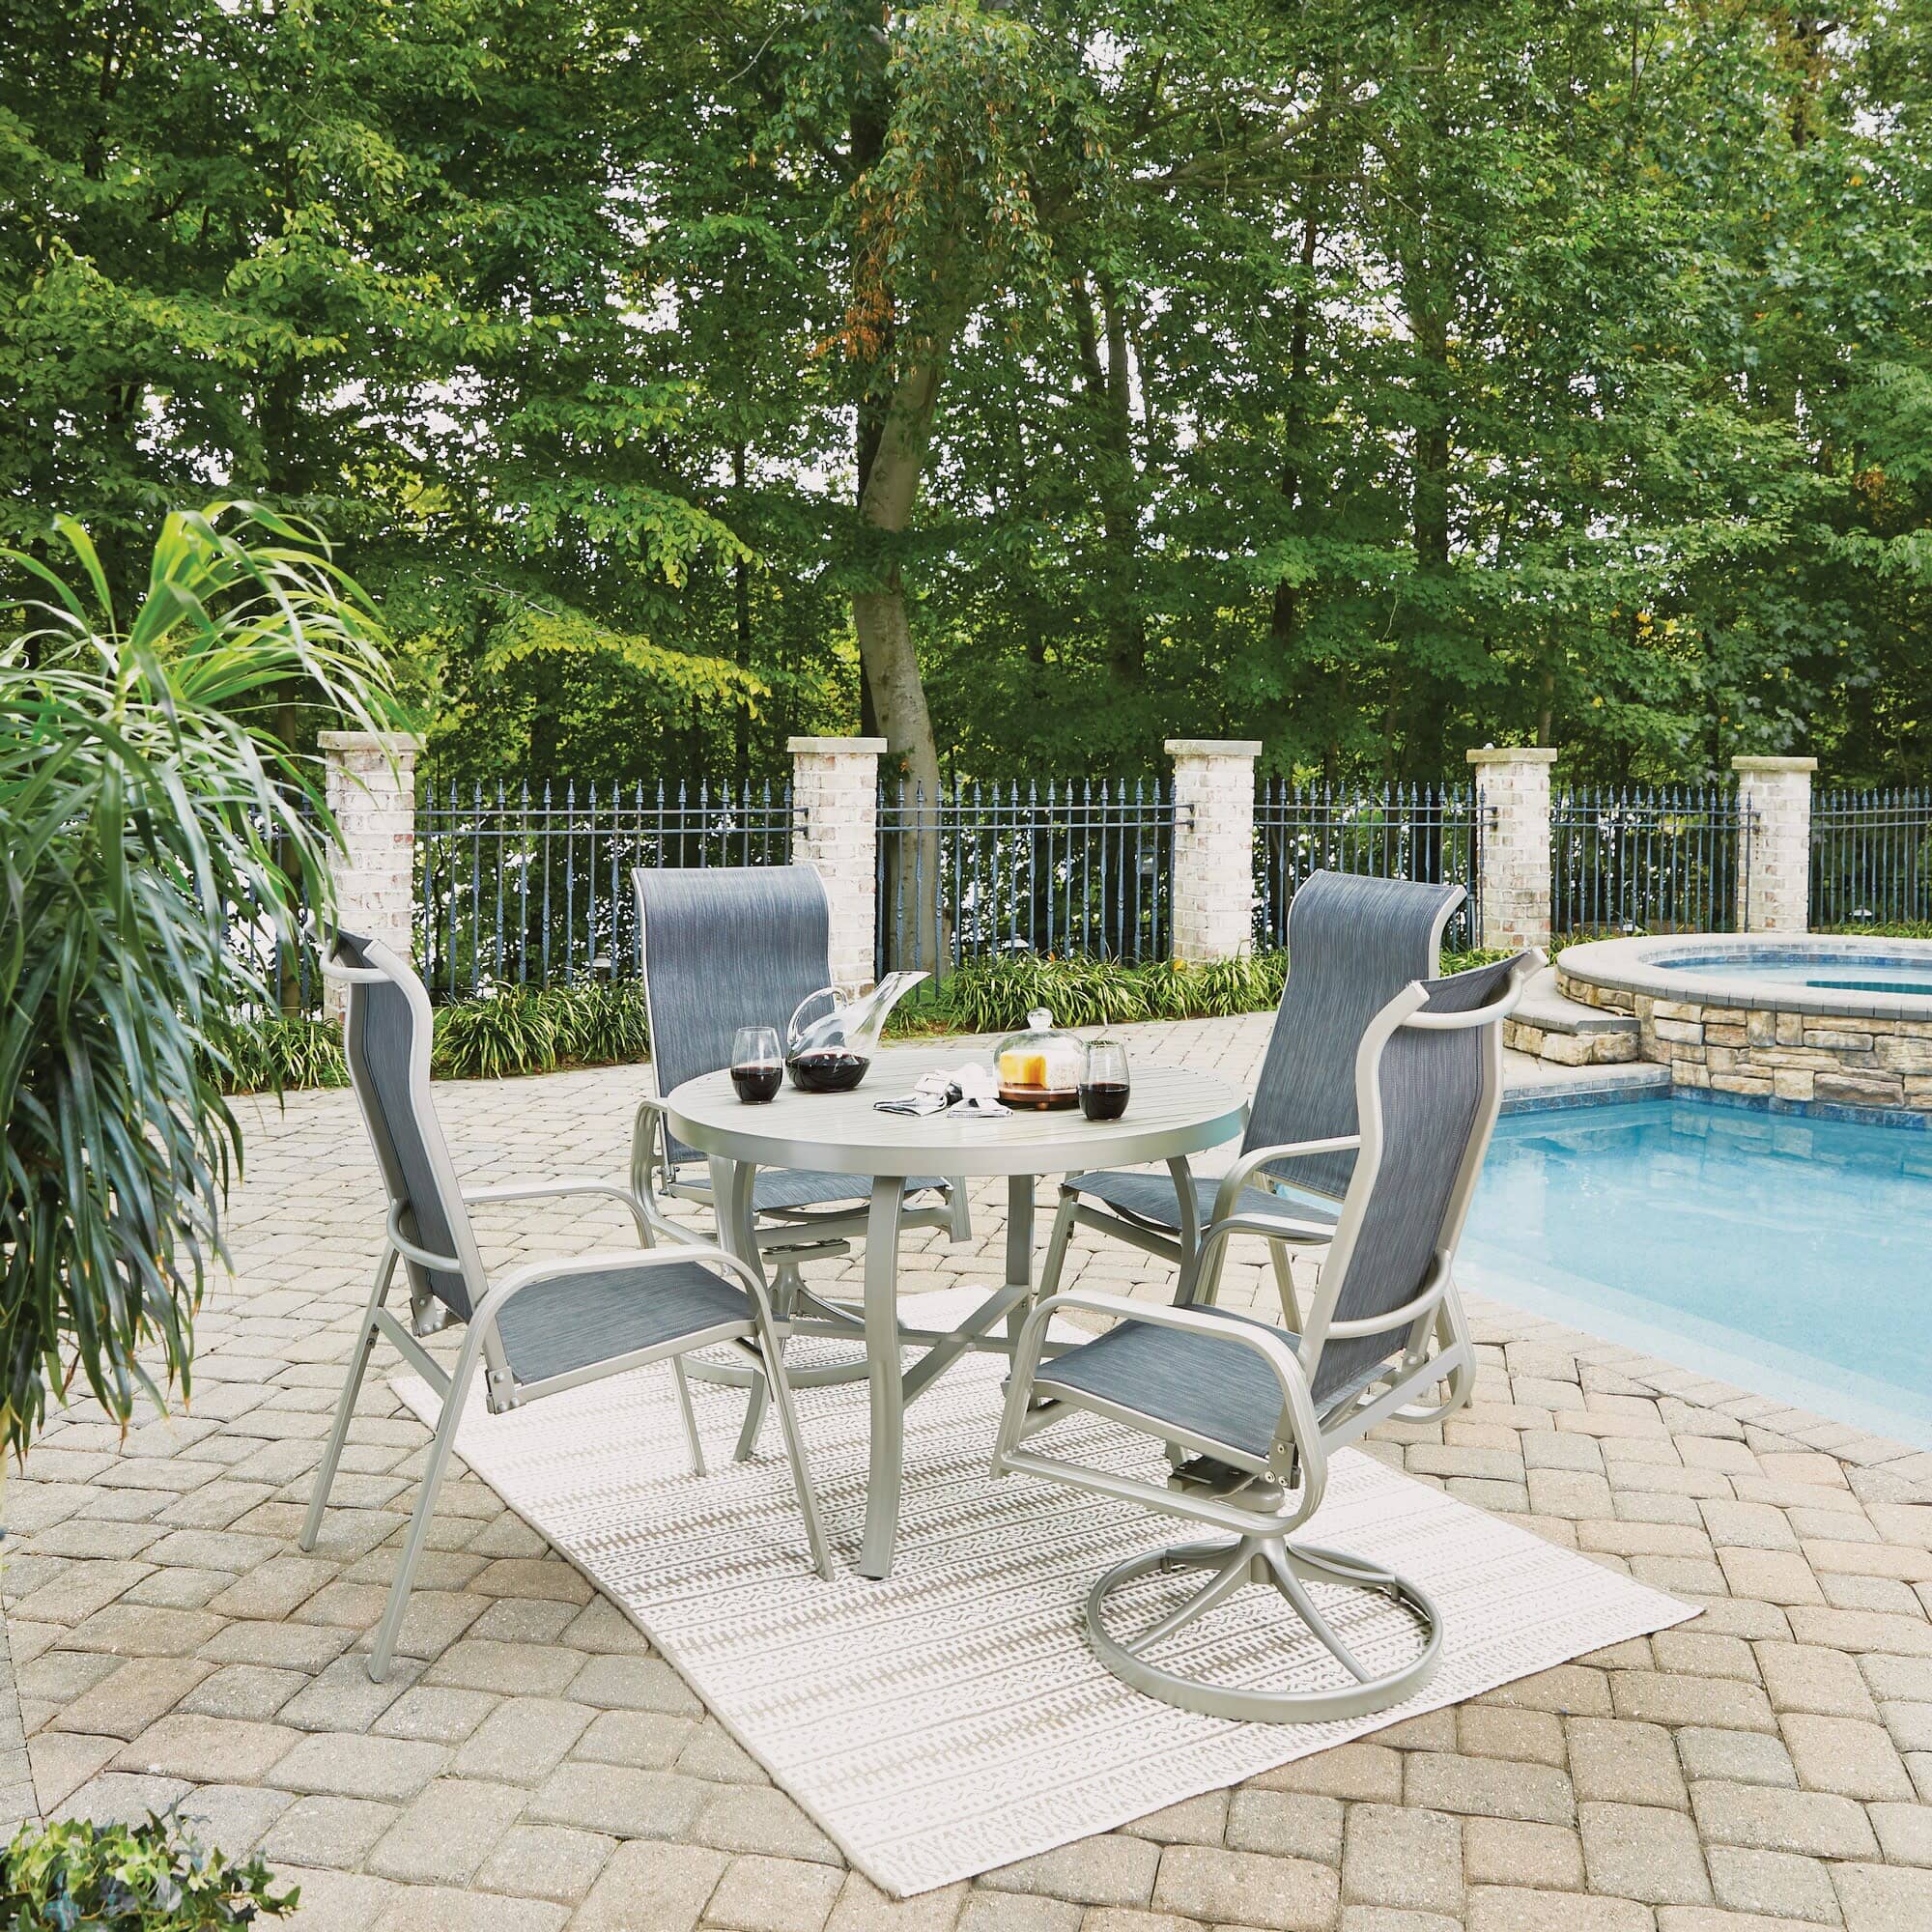 Modern & Contemporary 5 Piece Outdoor Dining Set By Captiva Dining Table & Chairs Captiva